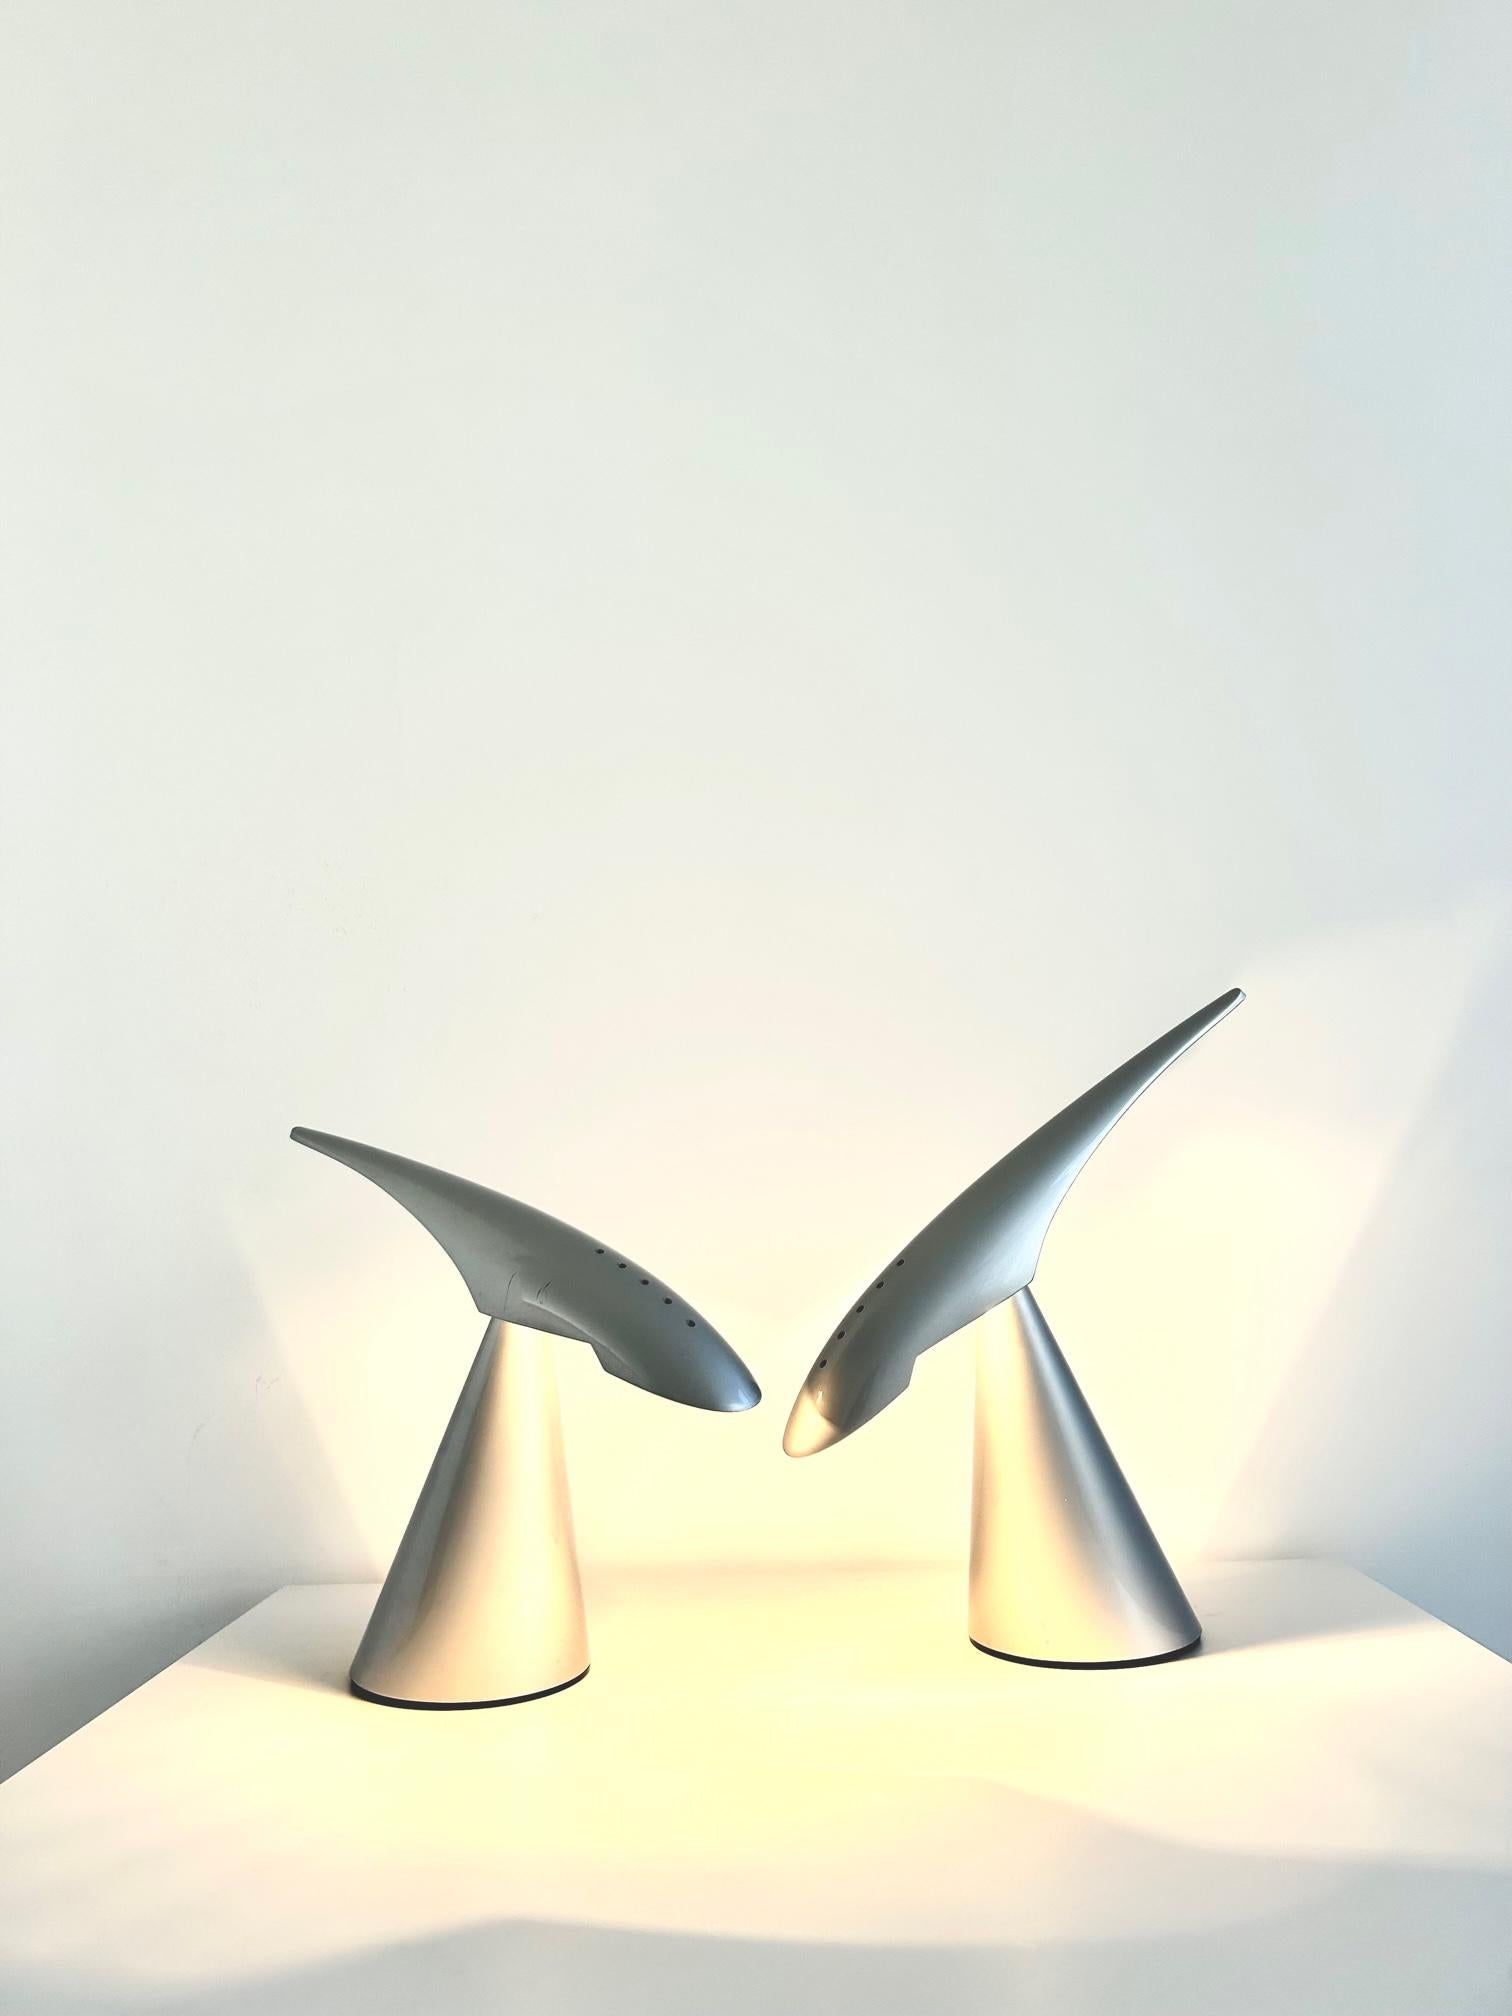 Pair of Ran Desk Lamps, Peter Naumann, ClassiCon, 1990s For Sale 3